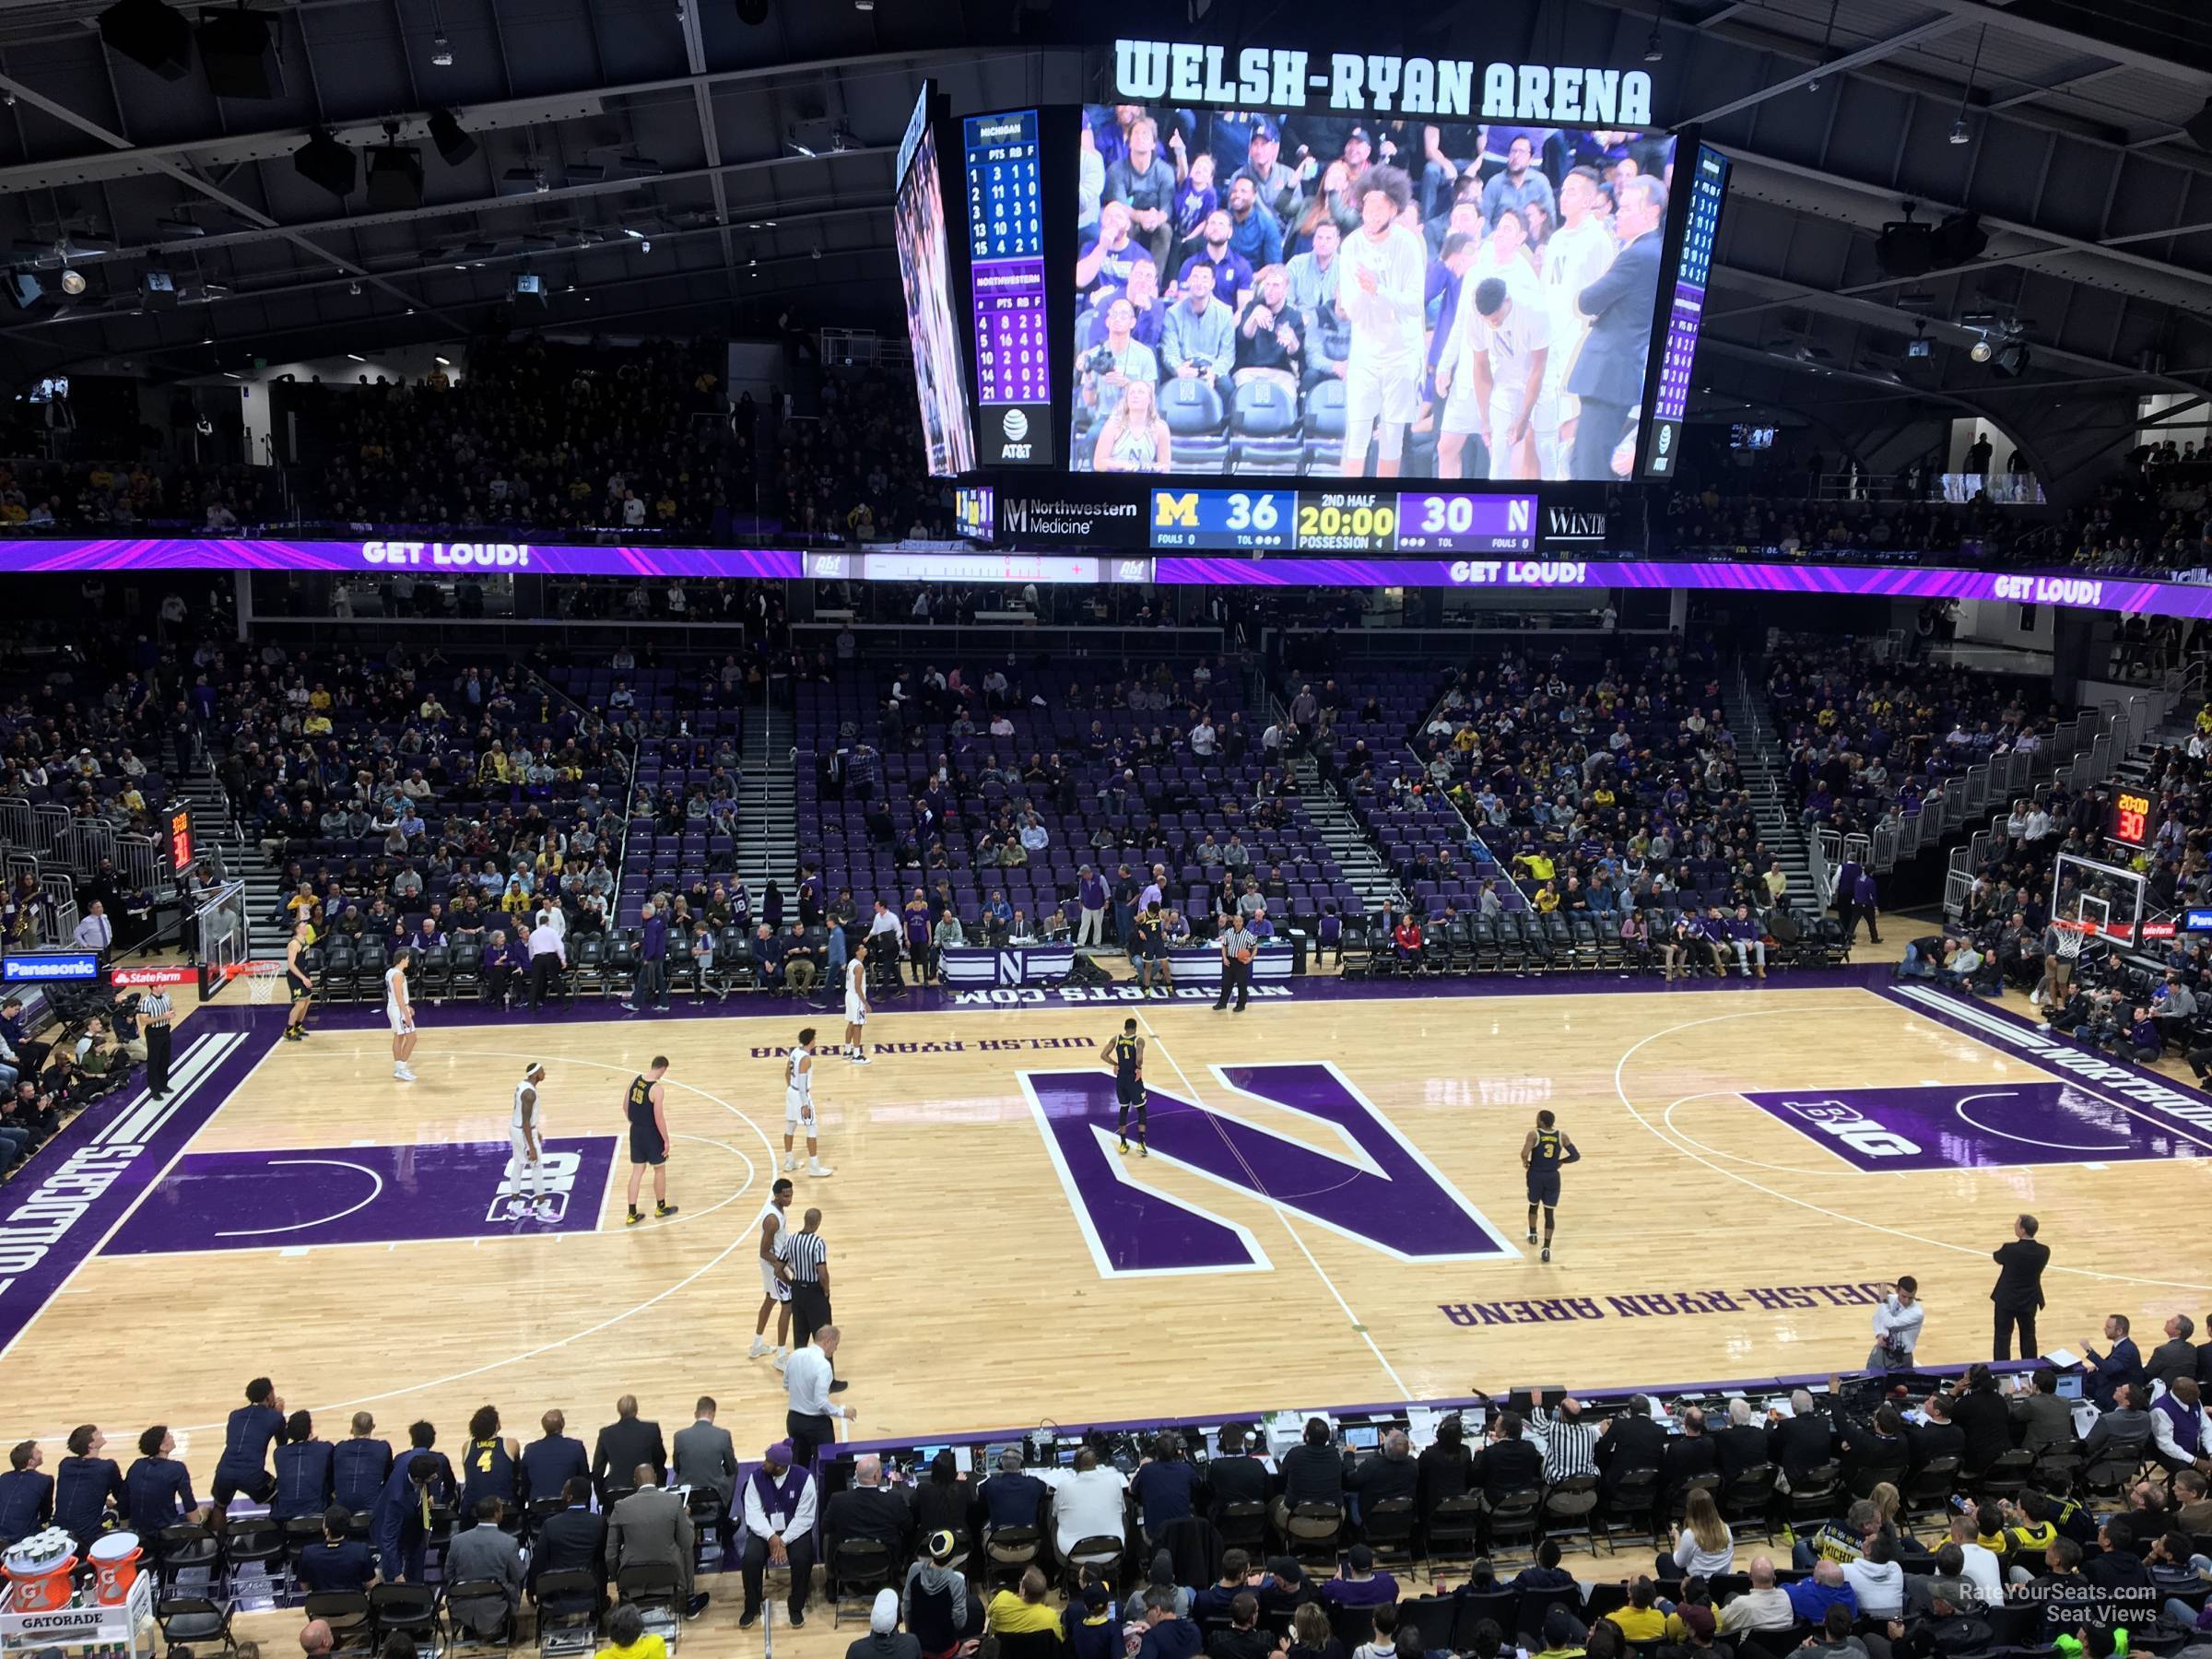 section 209, row 1 seat view  - welsh-ryan arena